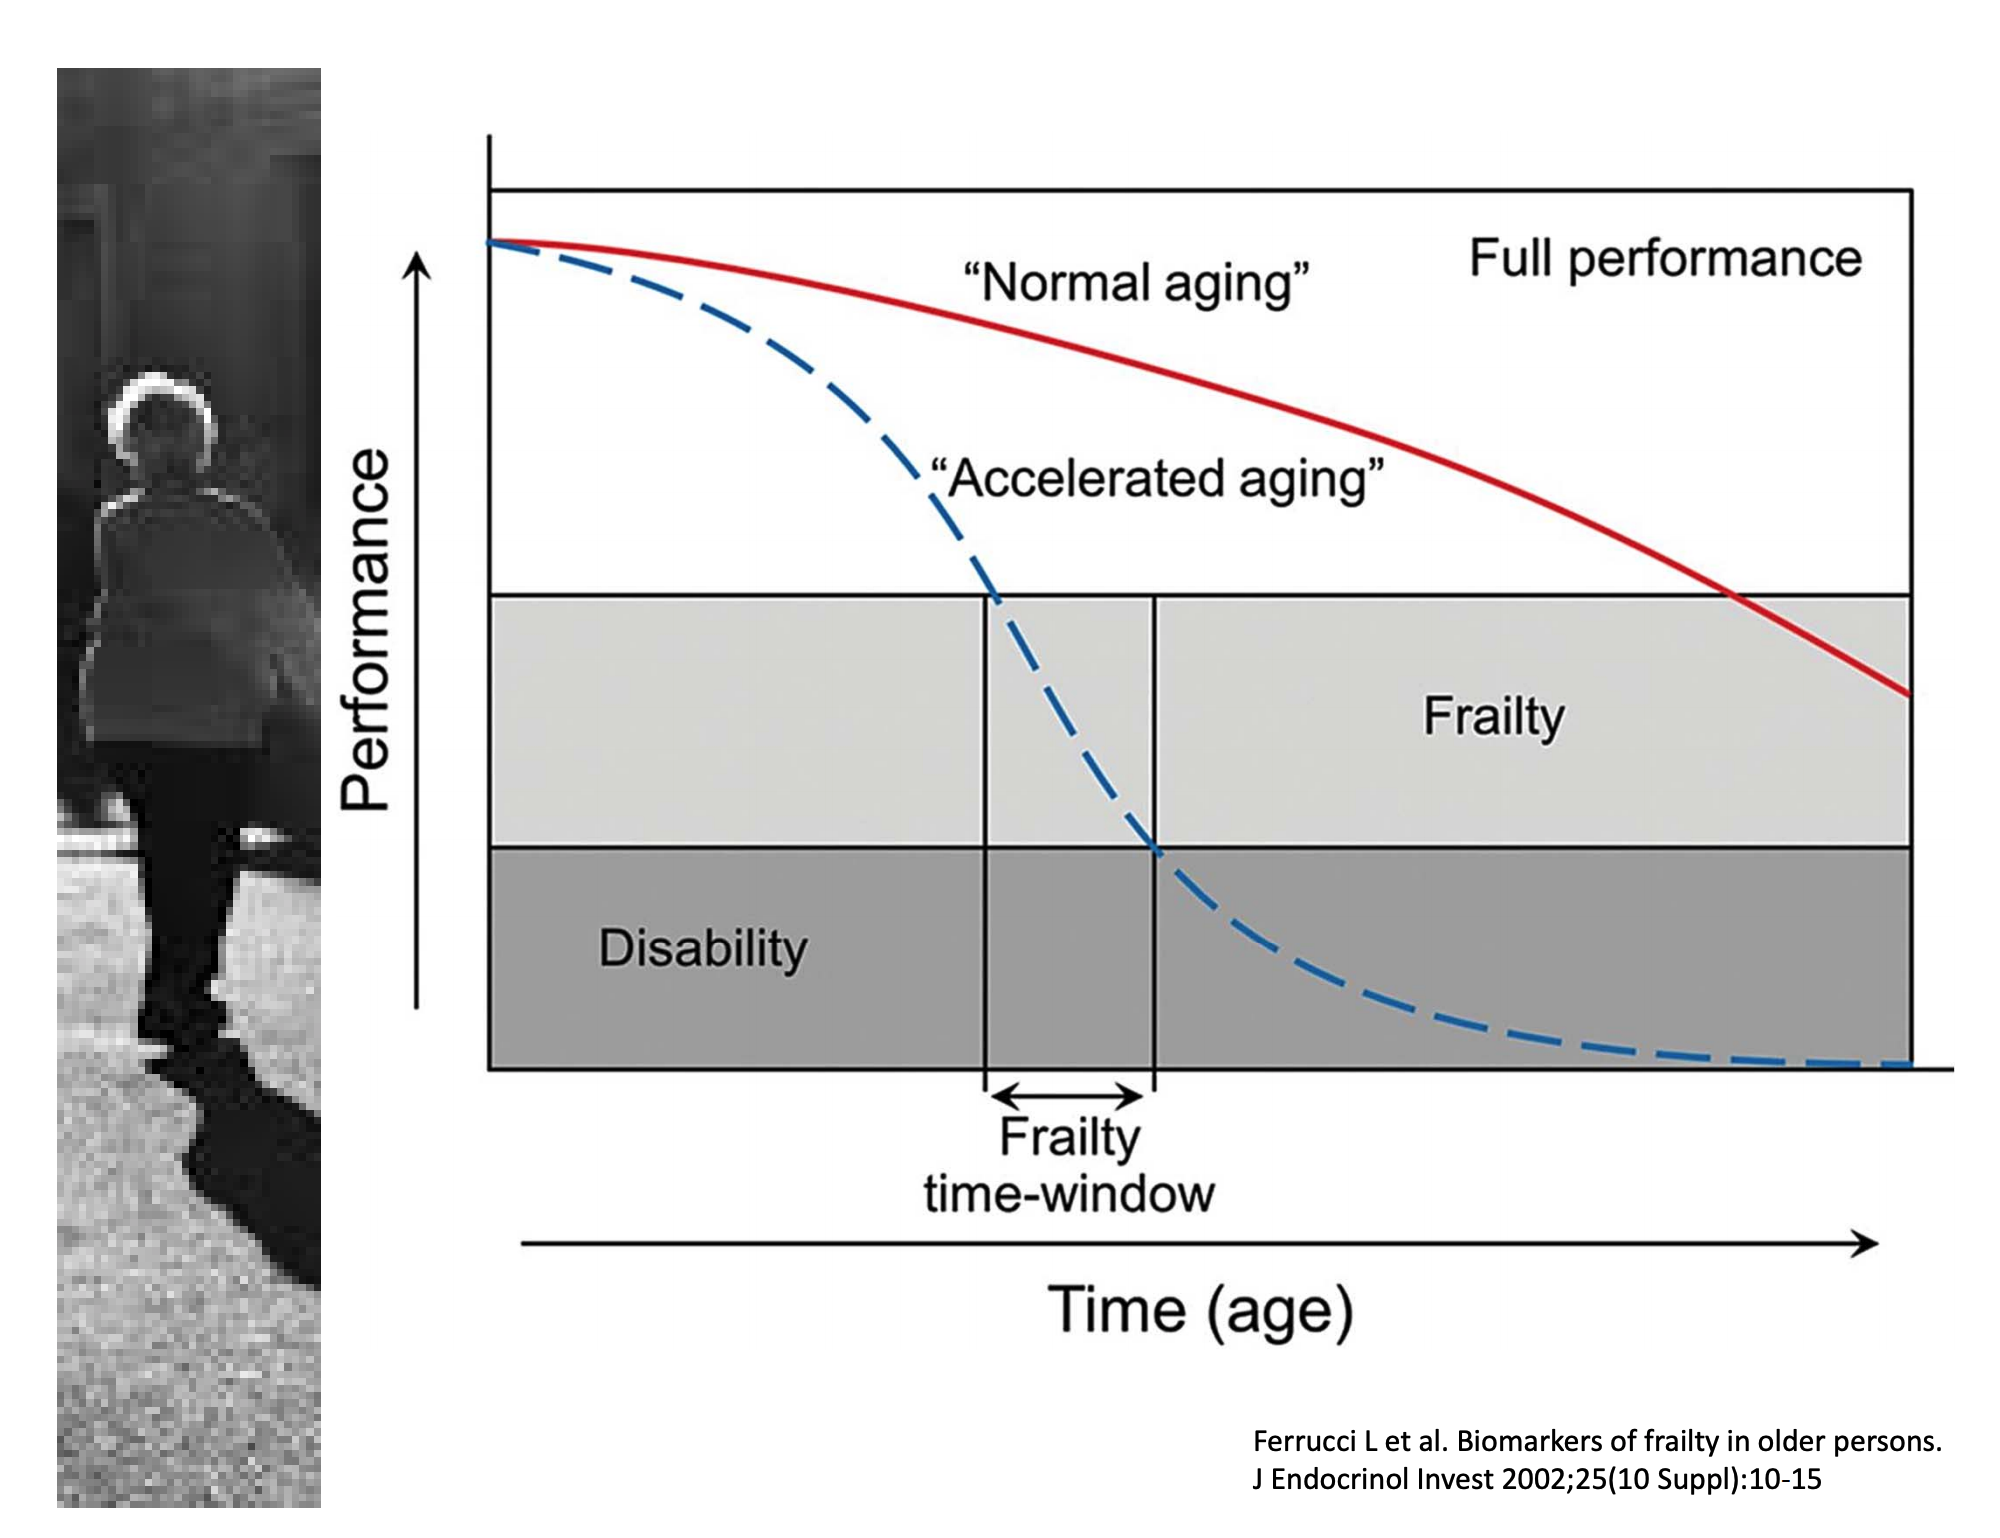 The effect of Frailty on aging